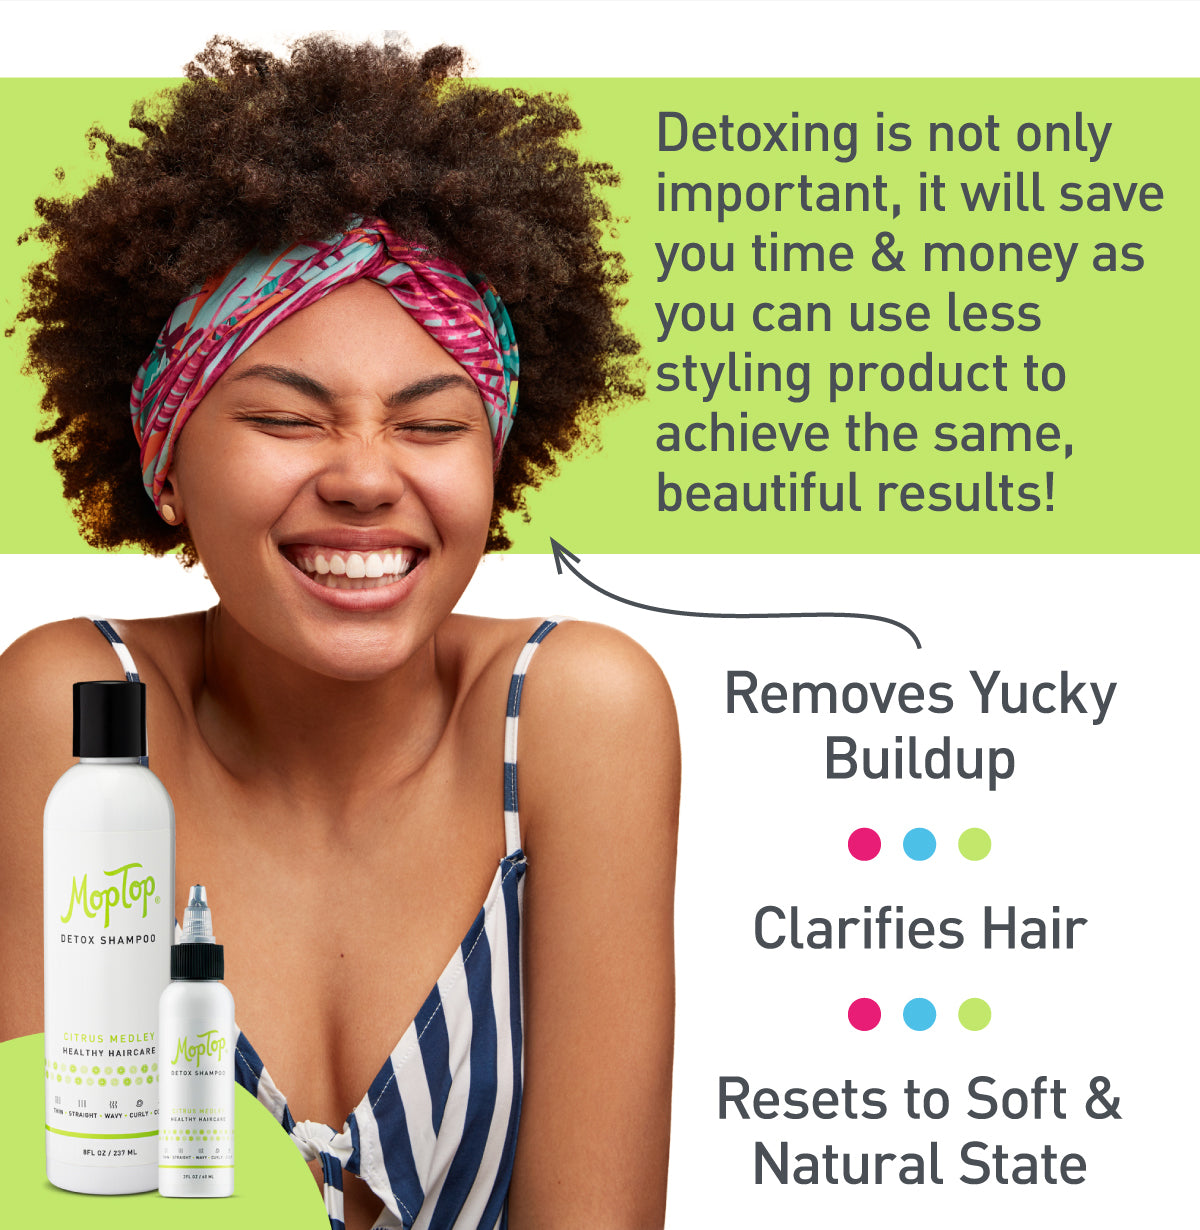 Detox is important to remove buildup, clarify hair and reset to natural state